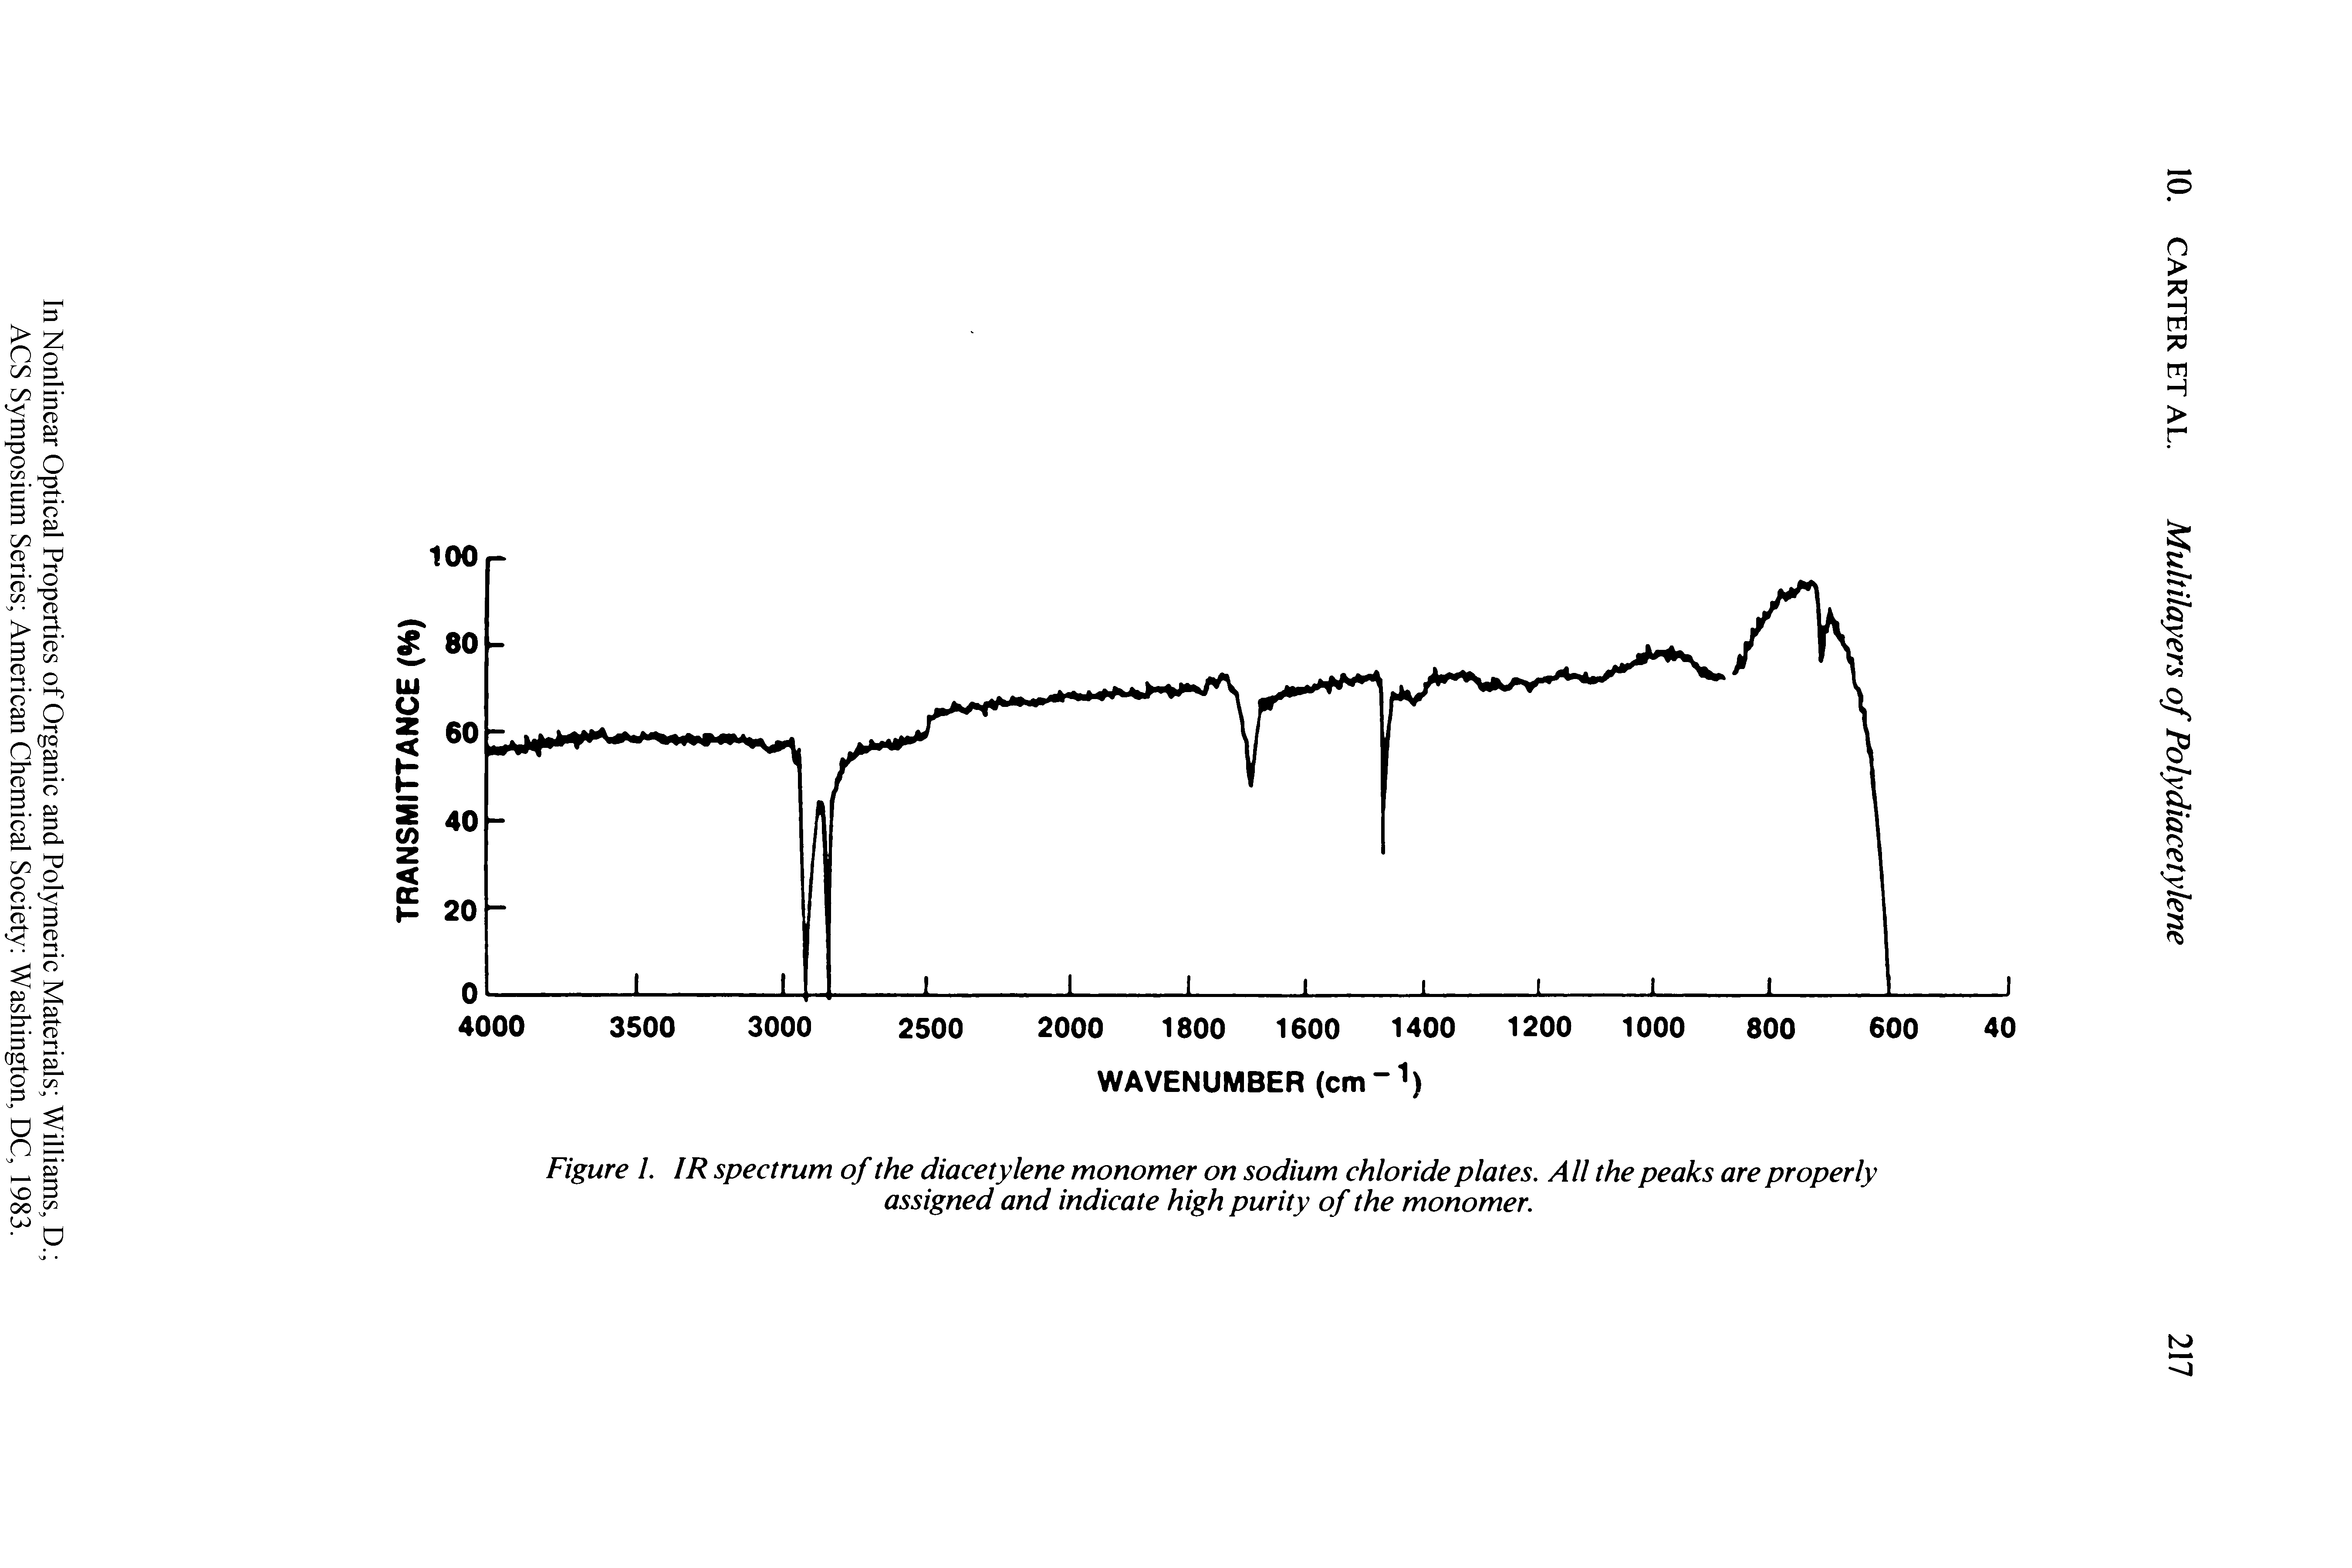 Figure 1. IR spectrum of the diacetylene monomer on sodium chloride plates. All the peaks are properly assigned and indicate high purity of the monomer.